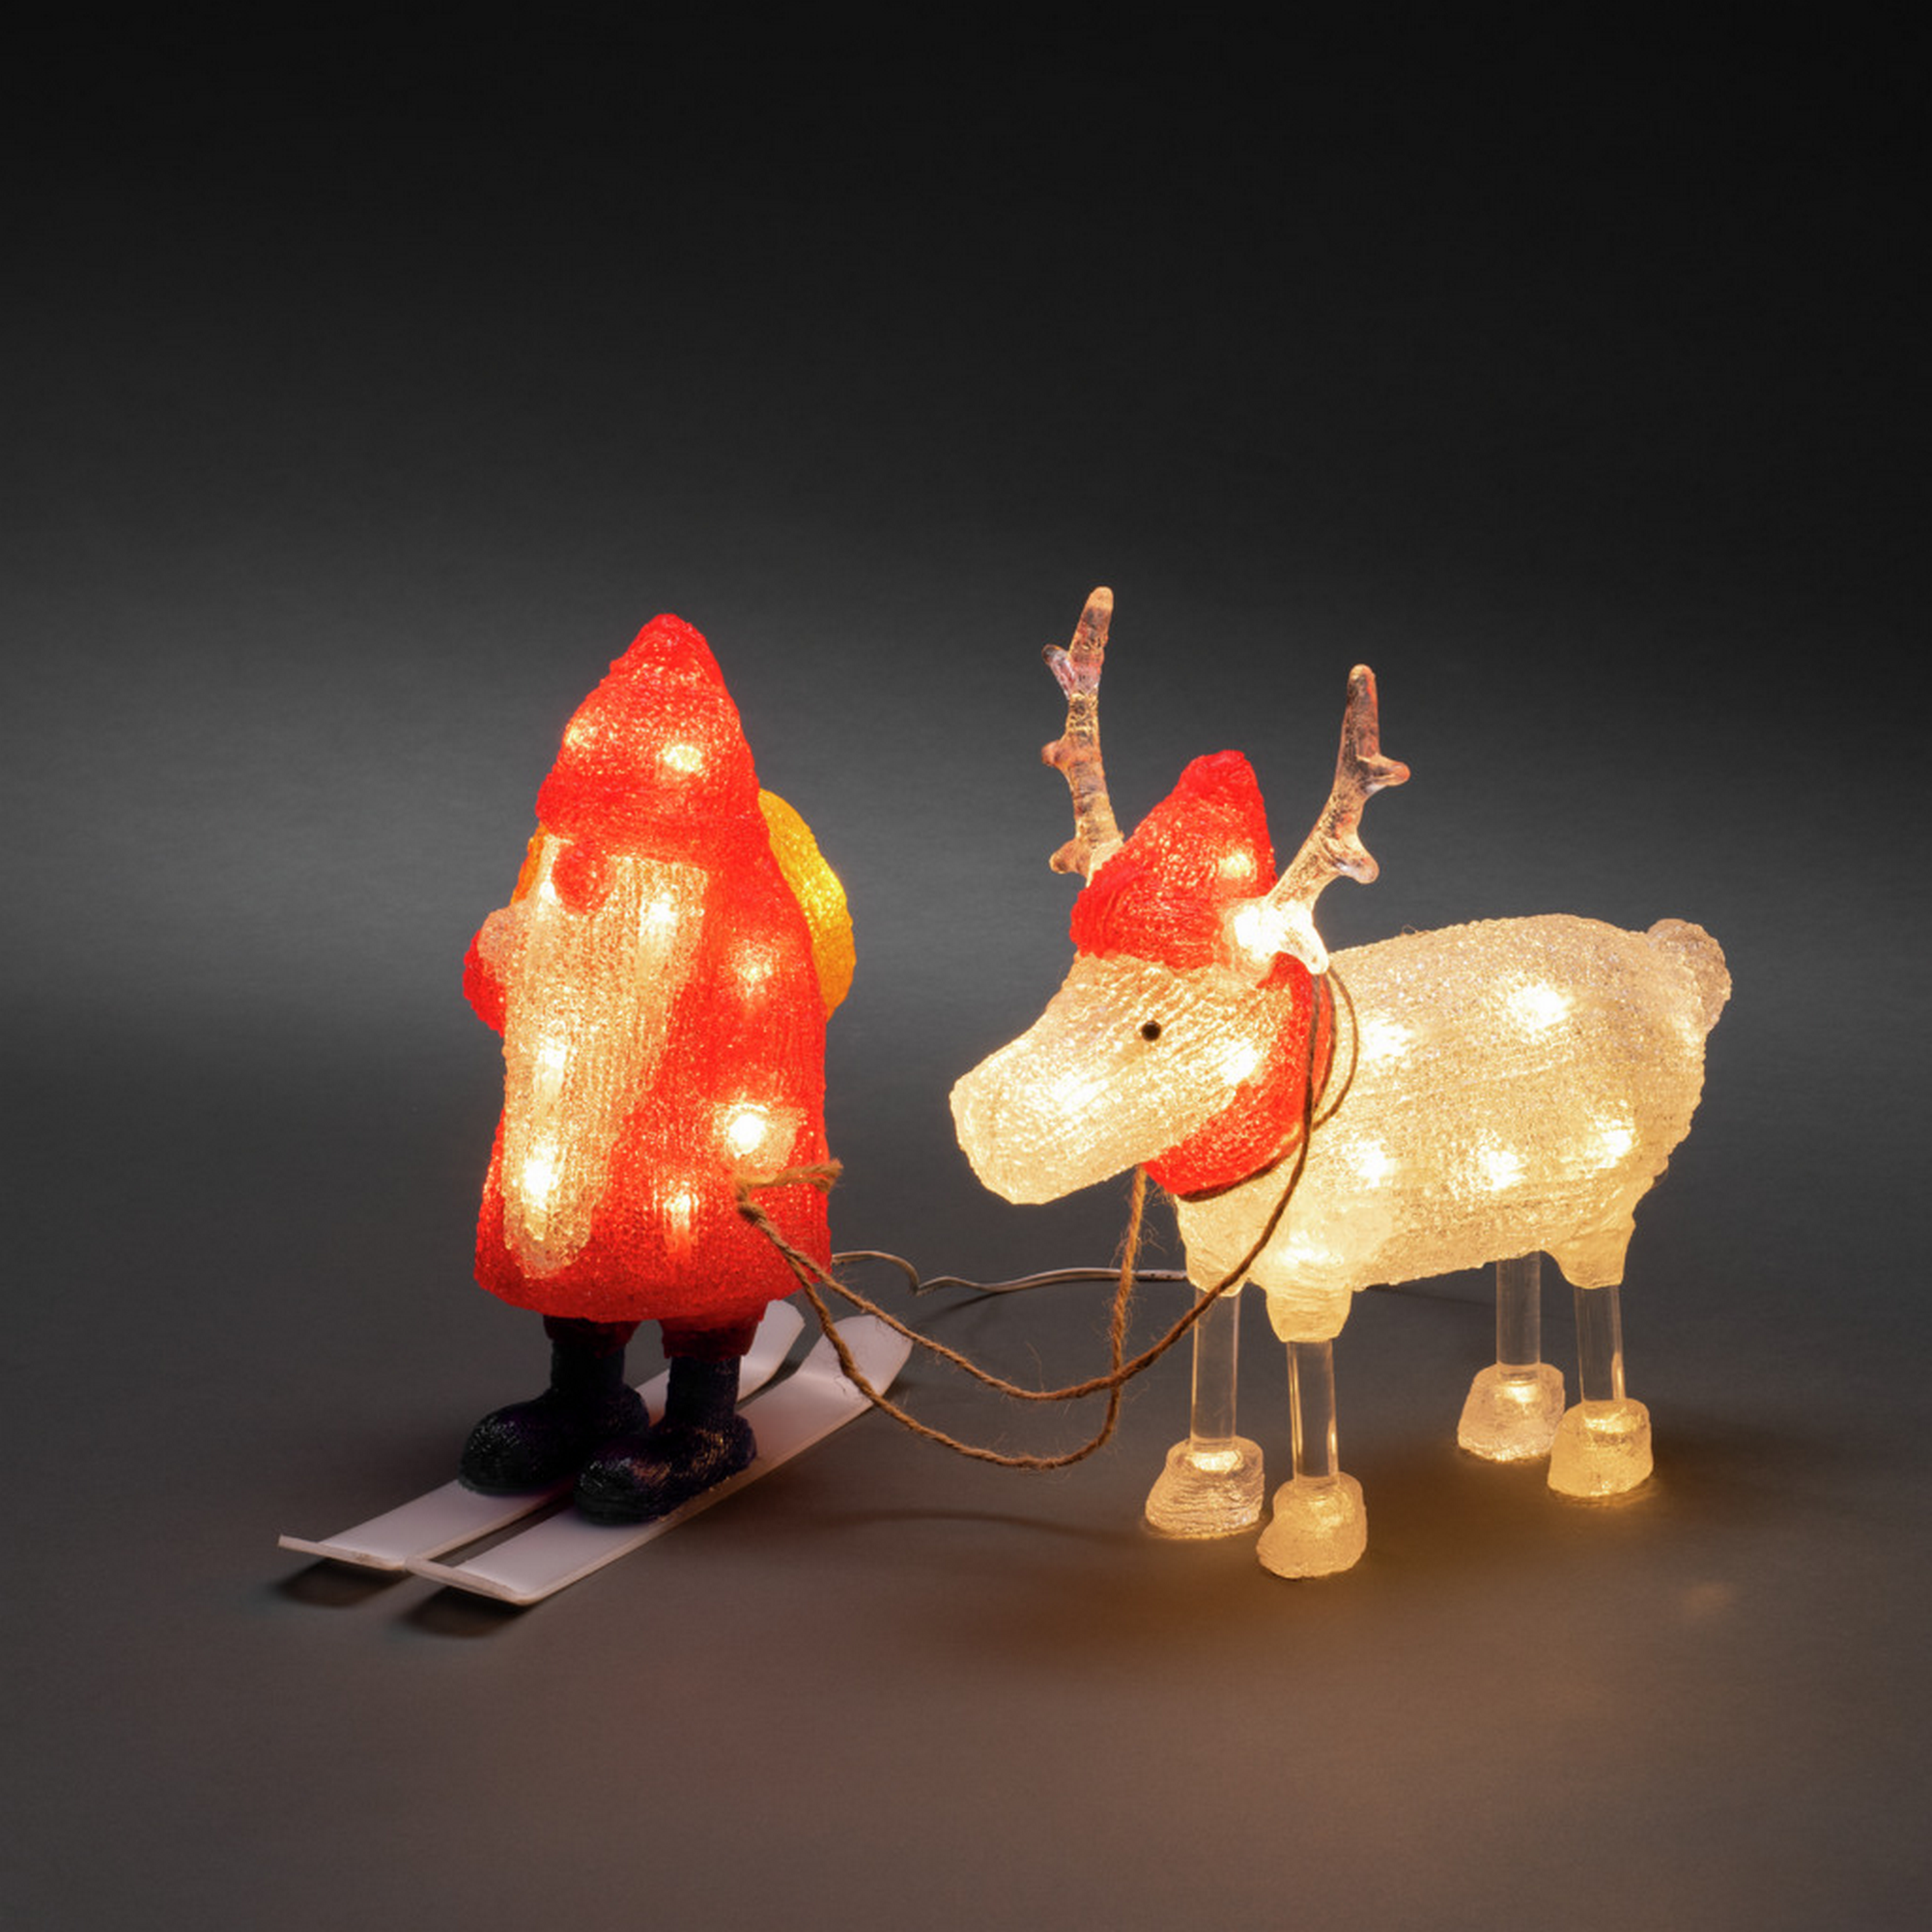 LED-Acryl 'Weihnachtsmann und Rentier' 40 LEDs warmweiß 23 x 23,5 cm + product picture